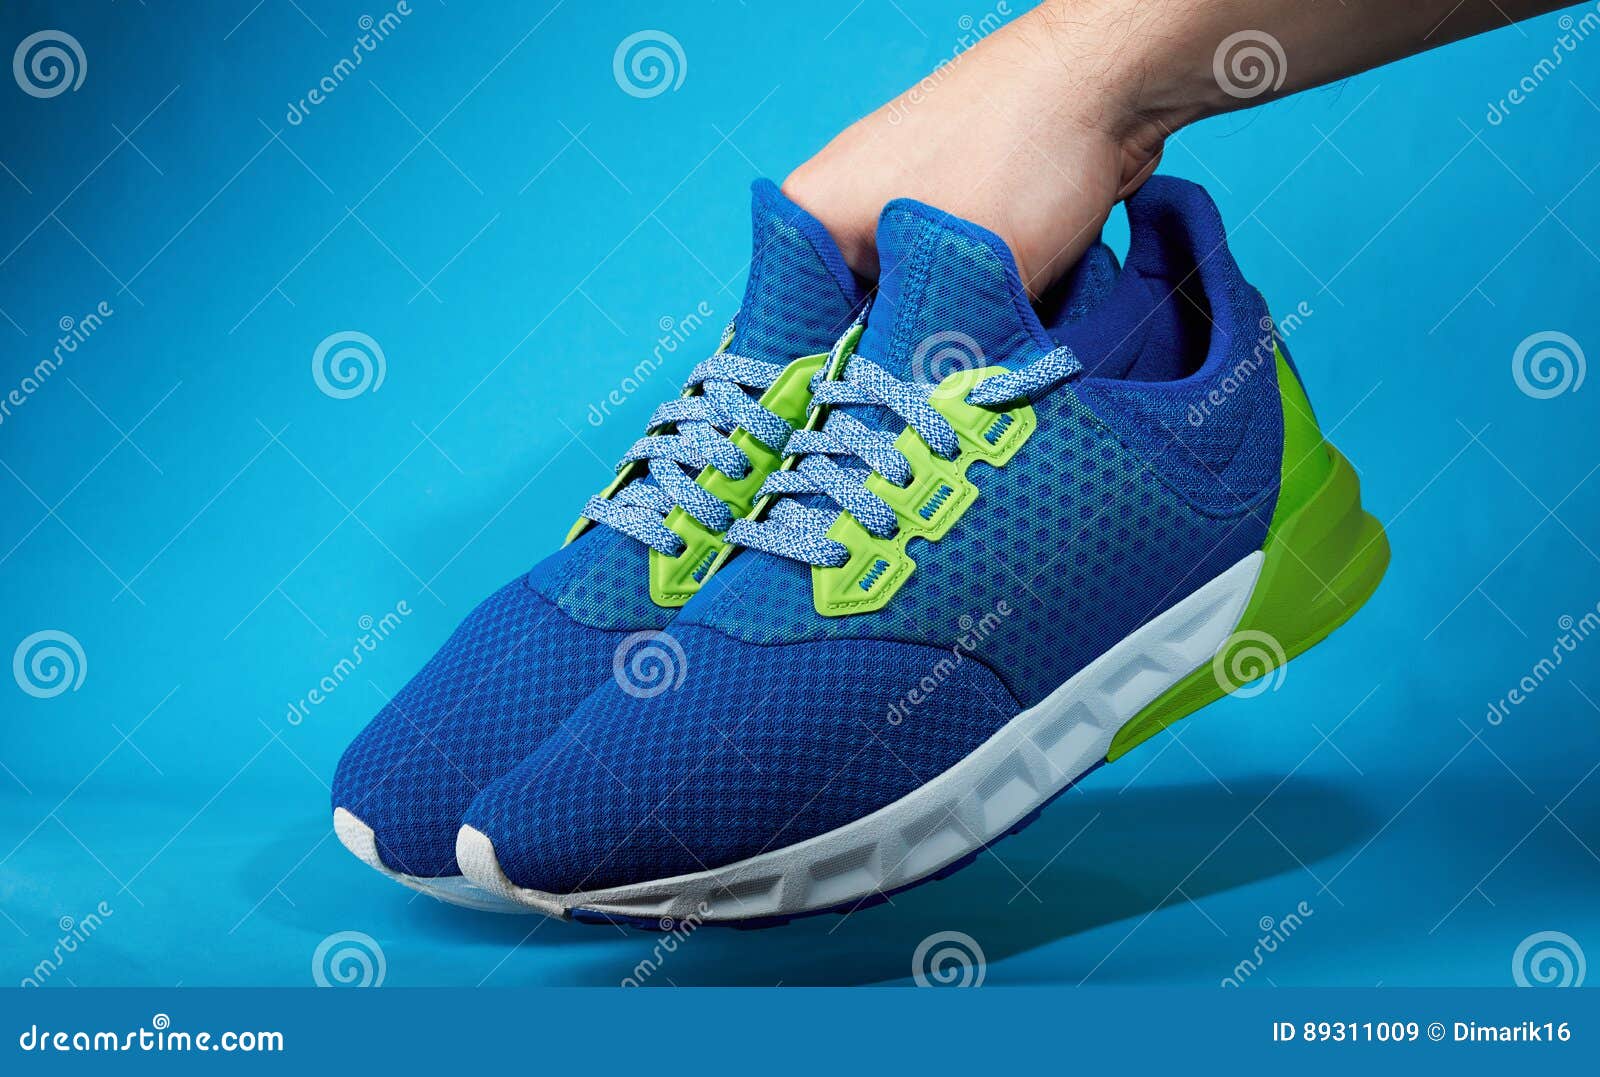 Hand Holding Pair of New Running Shoes Stock Image - Image of concept ...